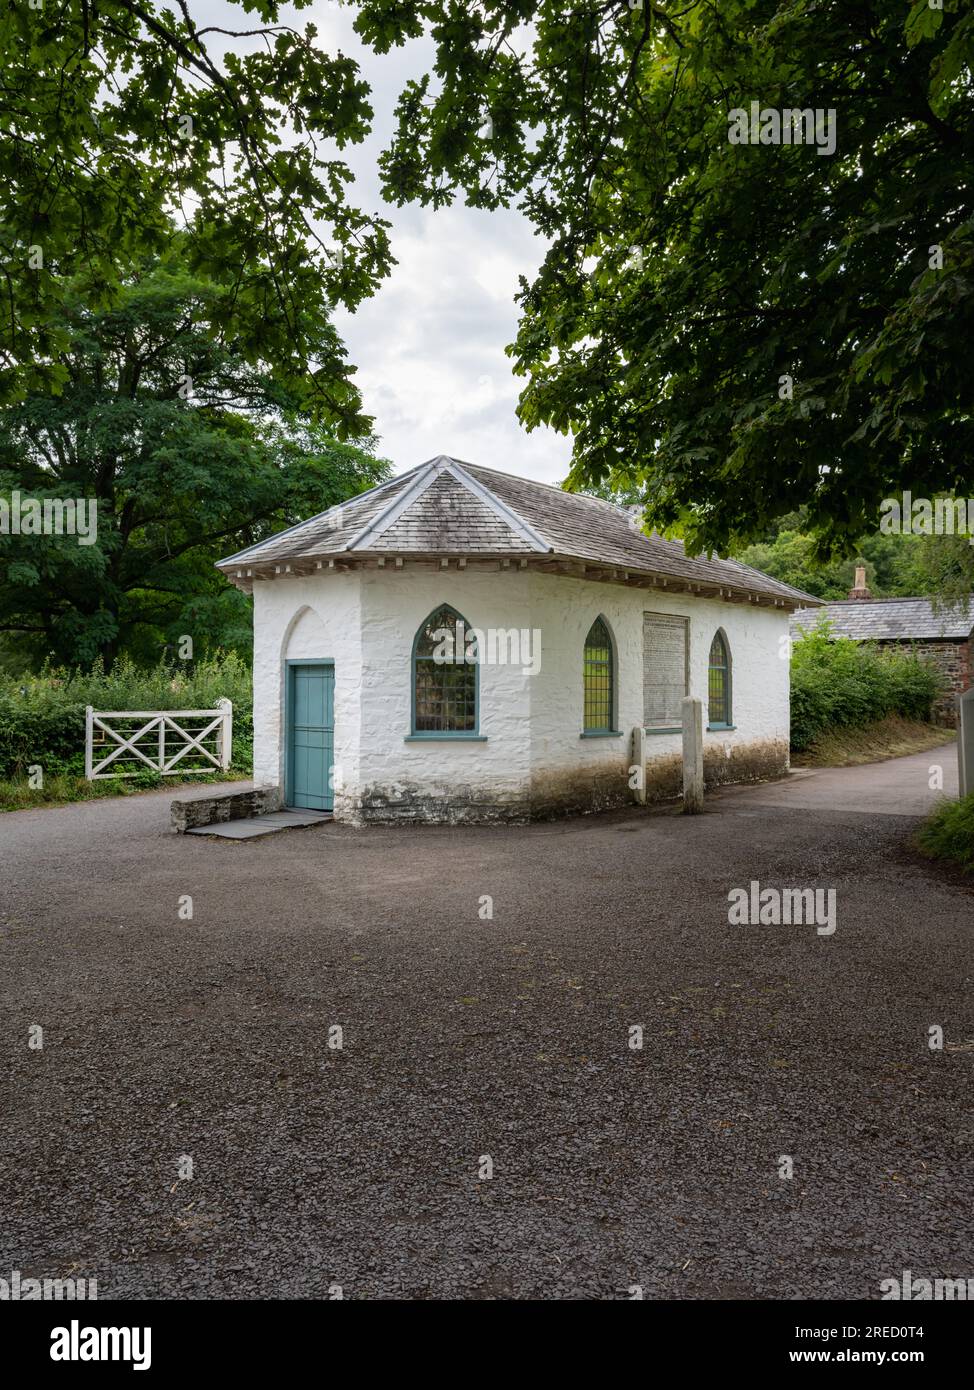 Tollhouse, St. Fagans National Museum of History, Cardiff, pays de Galles, Royaume-Uni Banque D'Images